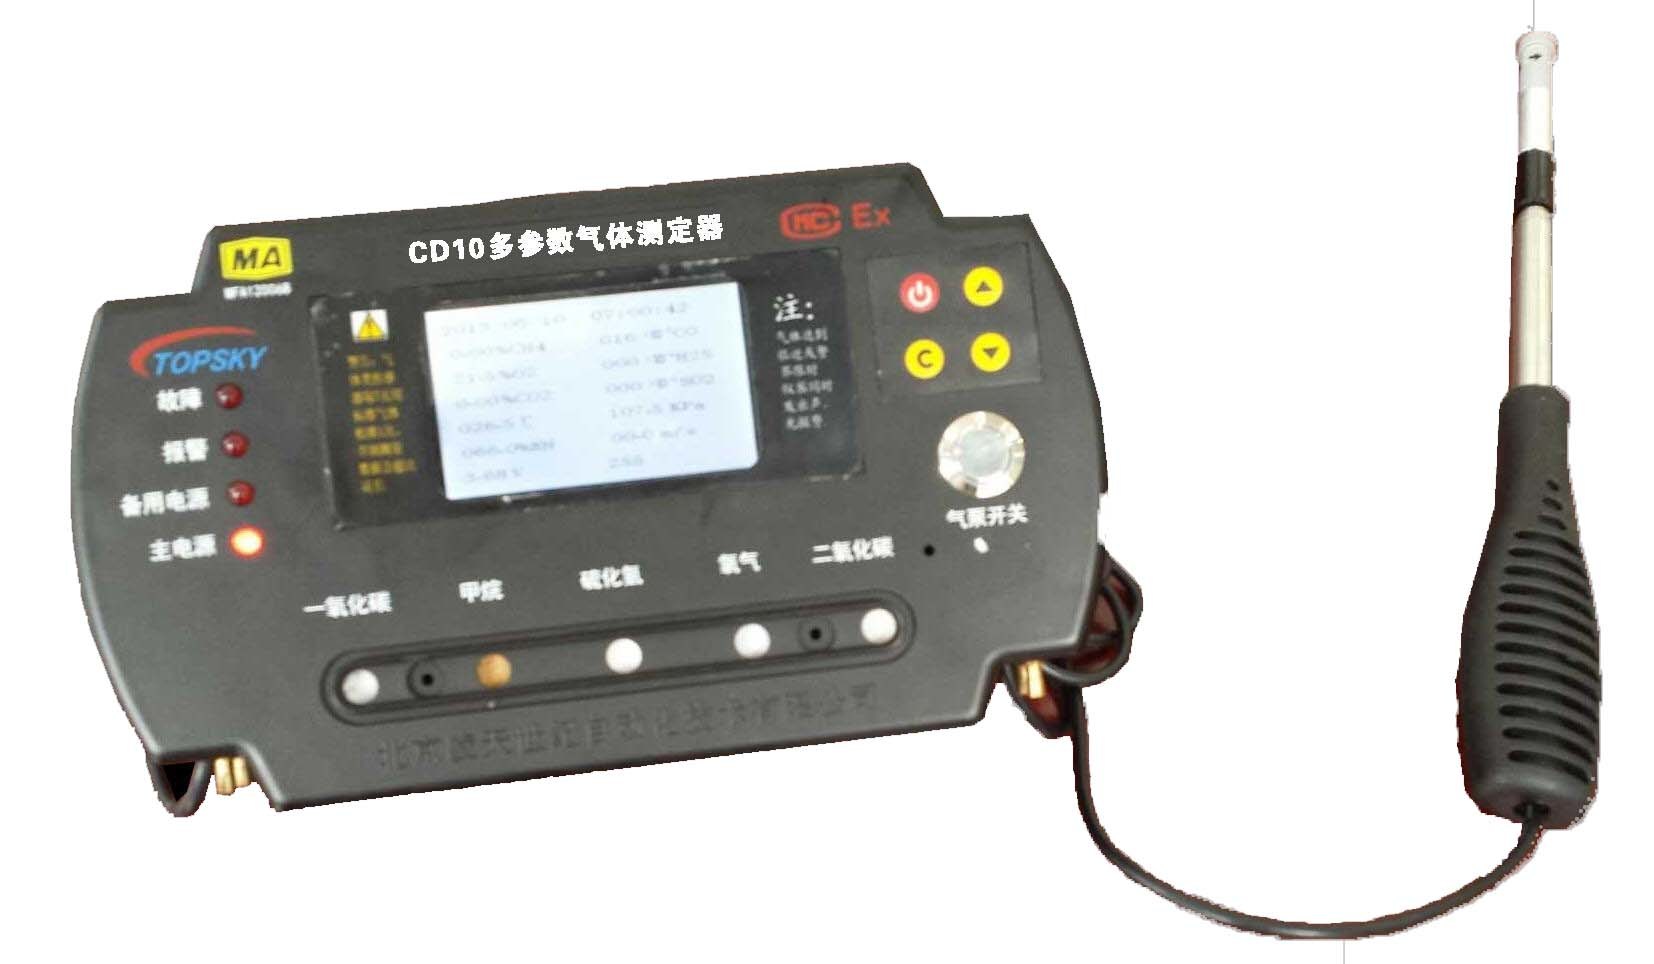 Highly Integrated Portable Instrumentation Measure Multi Gas and Air Quality